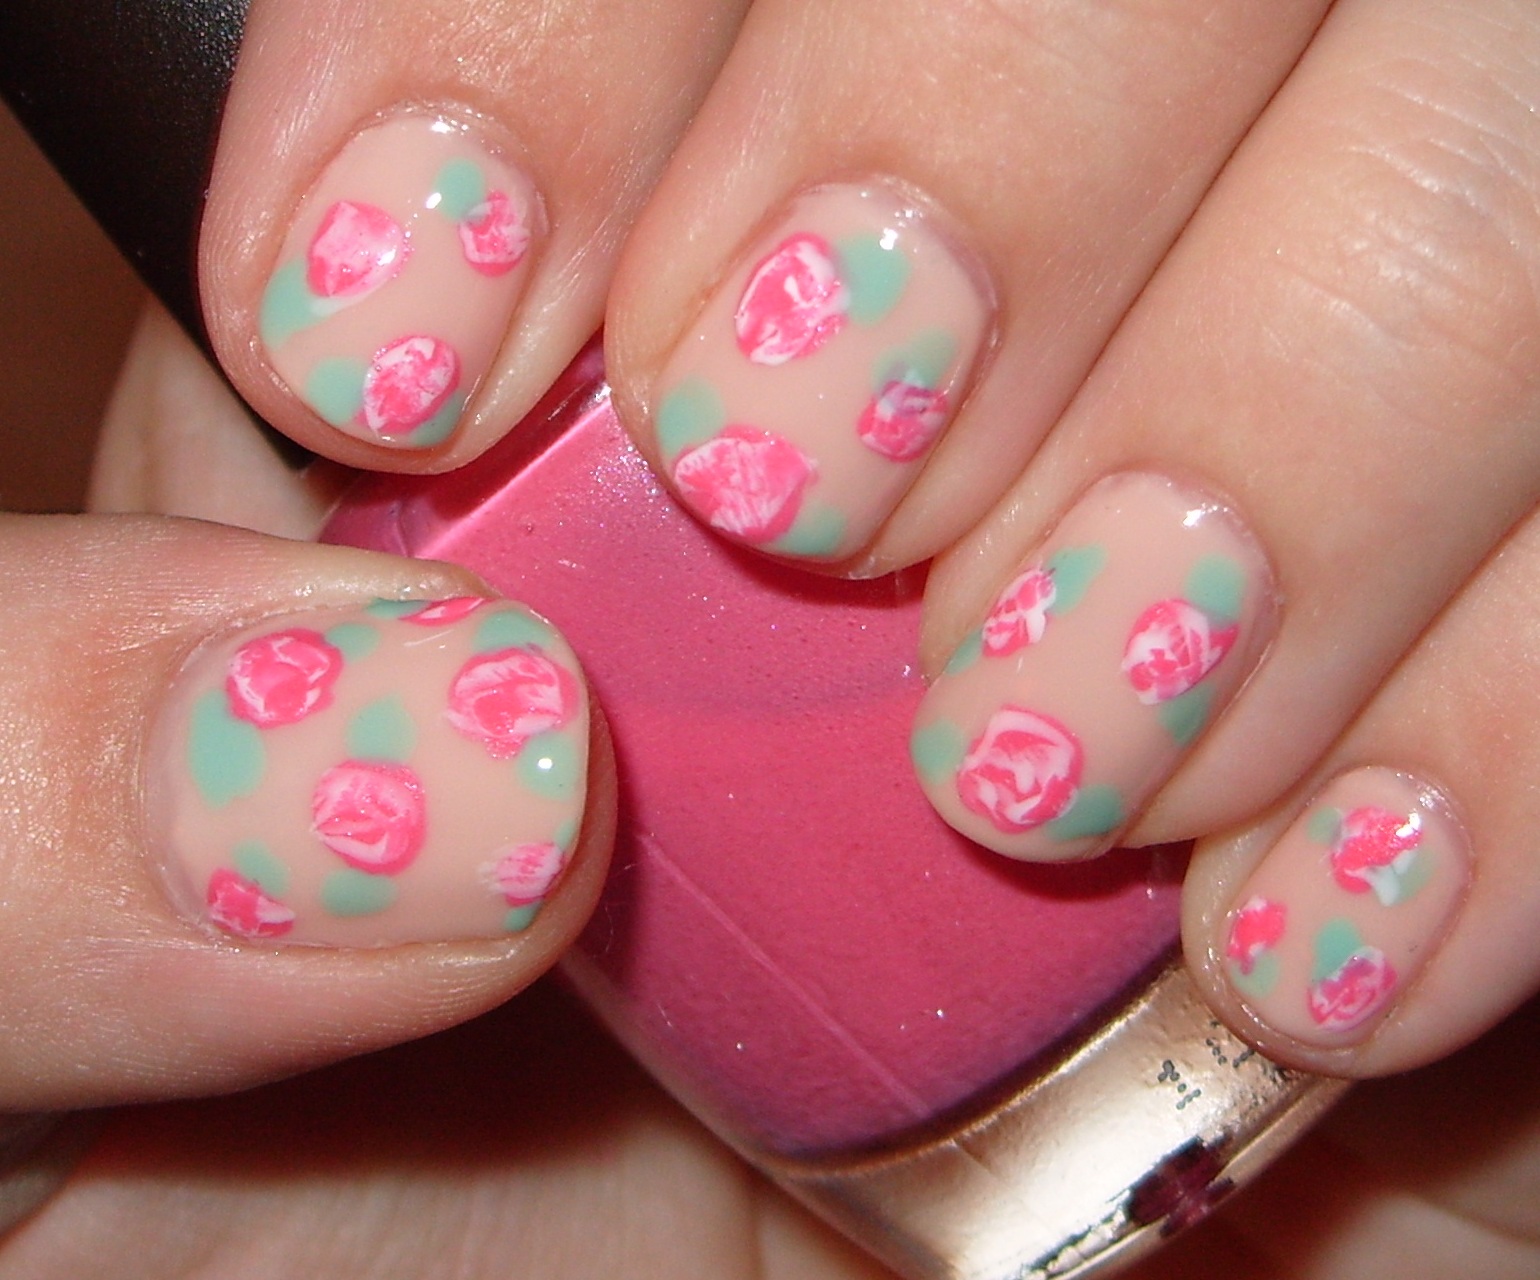 3. Stunning Airbrushed Rose Nail Art Ideas - wide 5